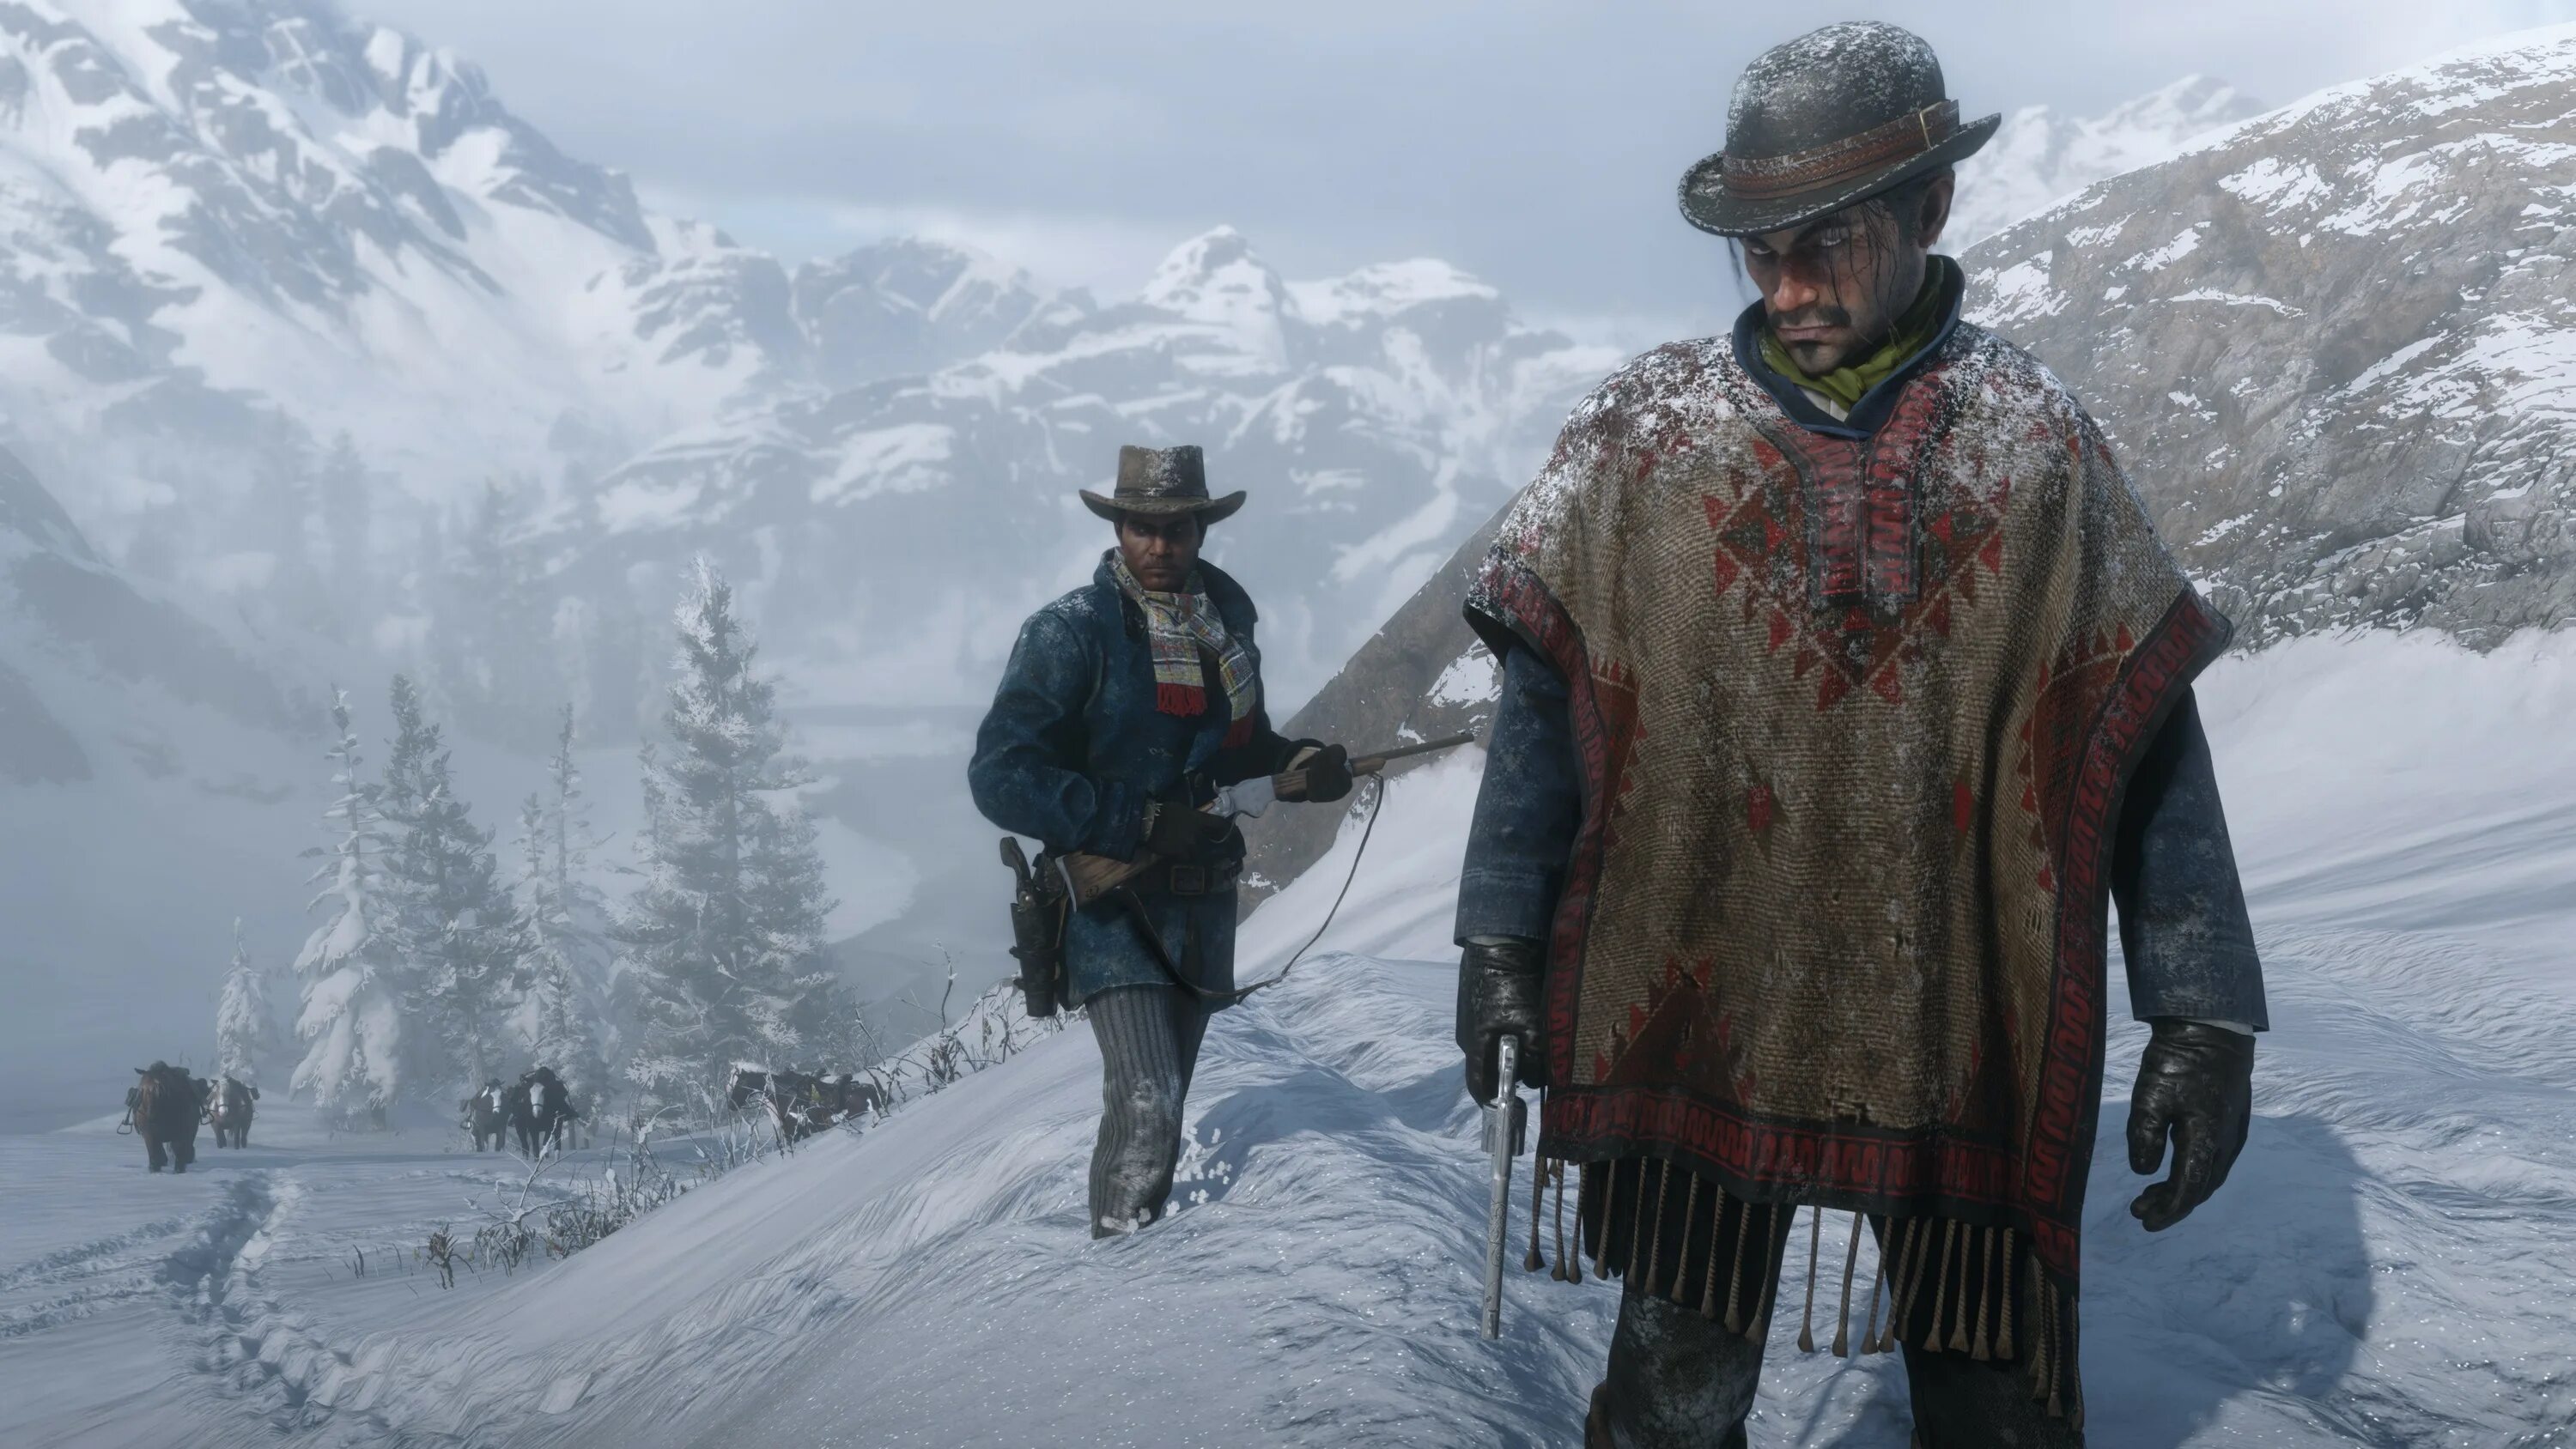 Red Dead Redemption 2. Rdr2 на ПК. Red Dead Redemption 2 (PC). Red Dead Redemption 2 последняя версия. Read red 2